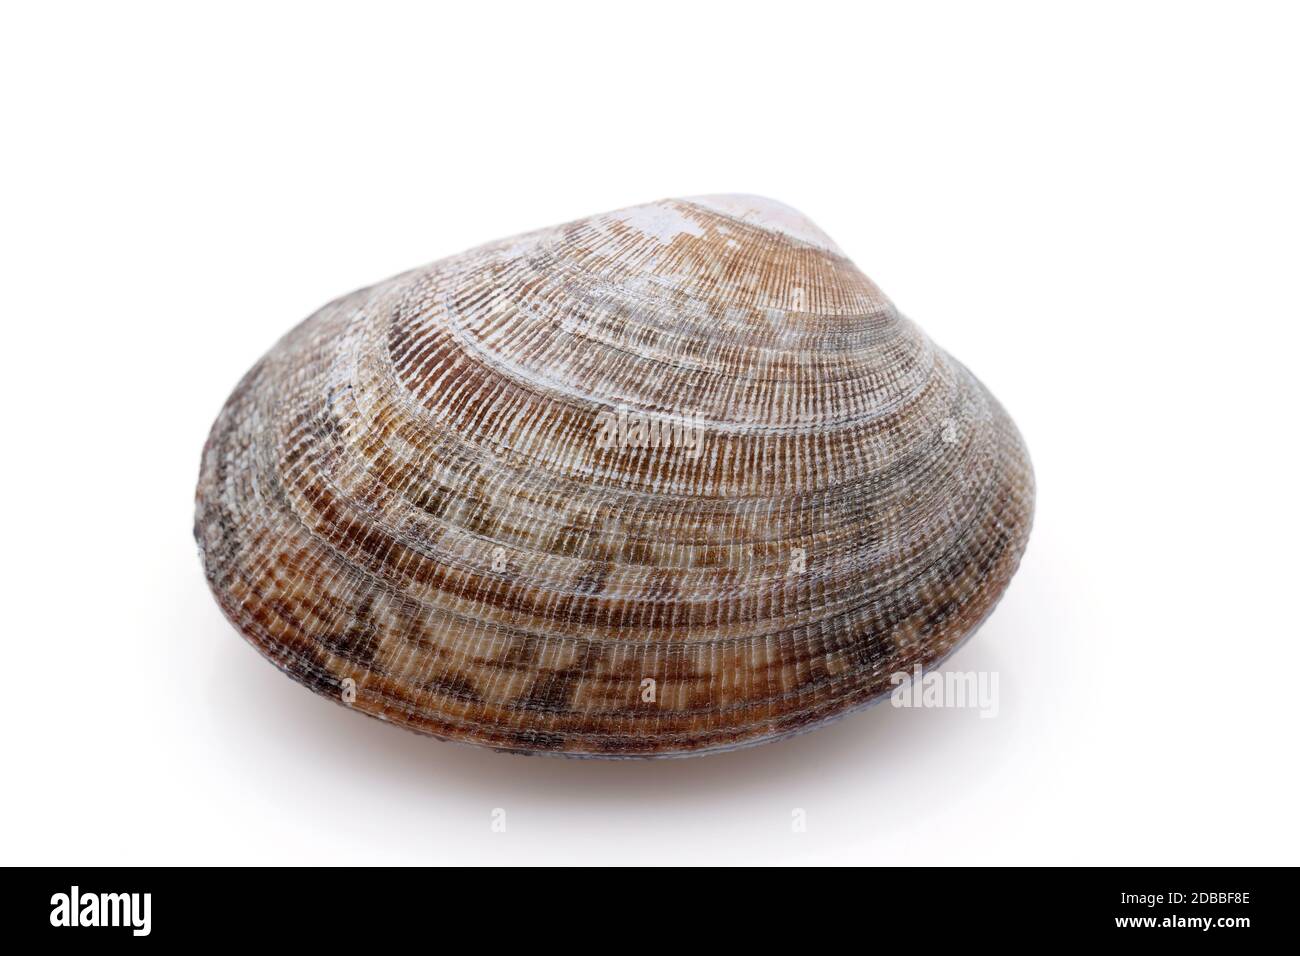 Close up of Japanese asari clams on white background Stock Photo